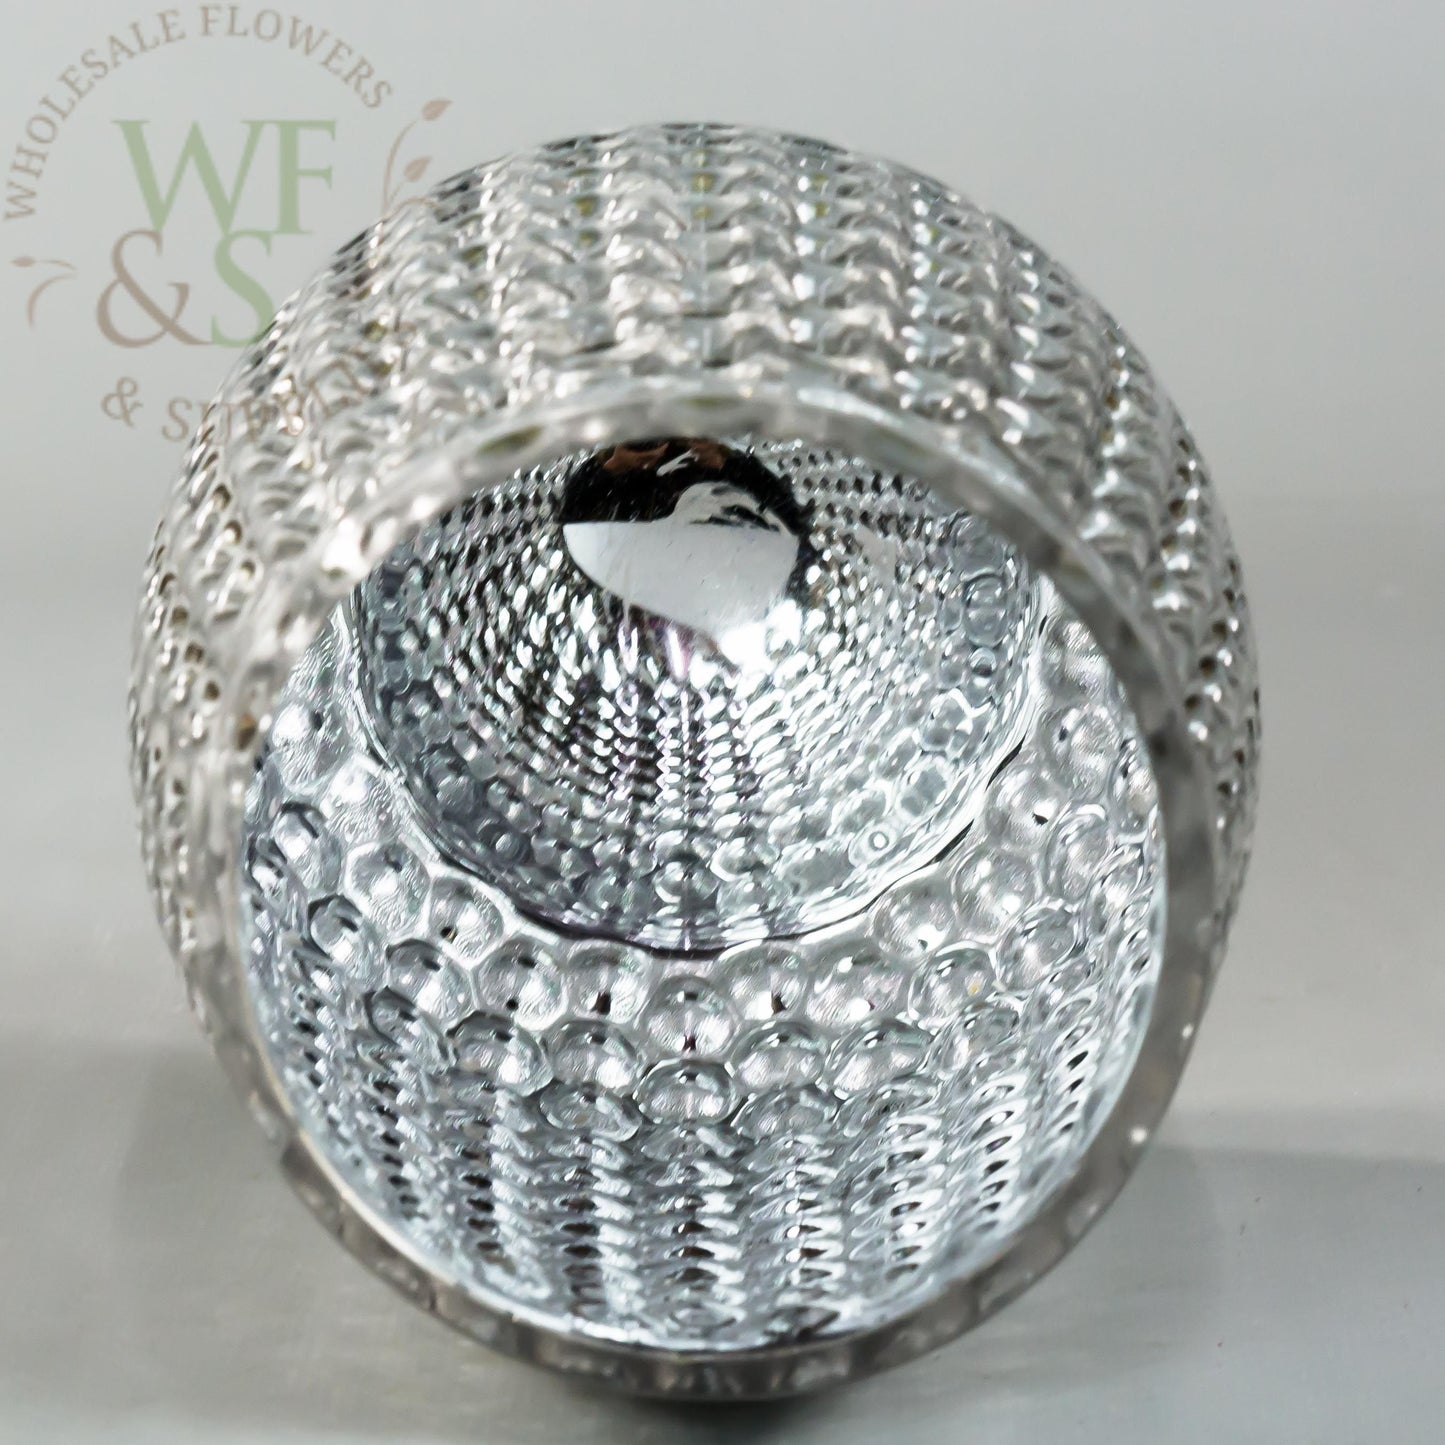 Silver Mercury Glass Bubbled Vase Candle Holder